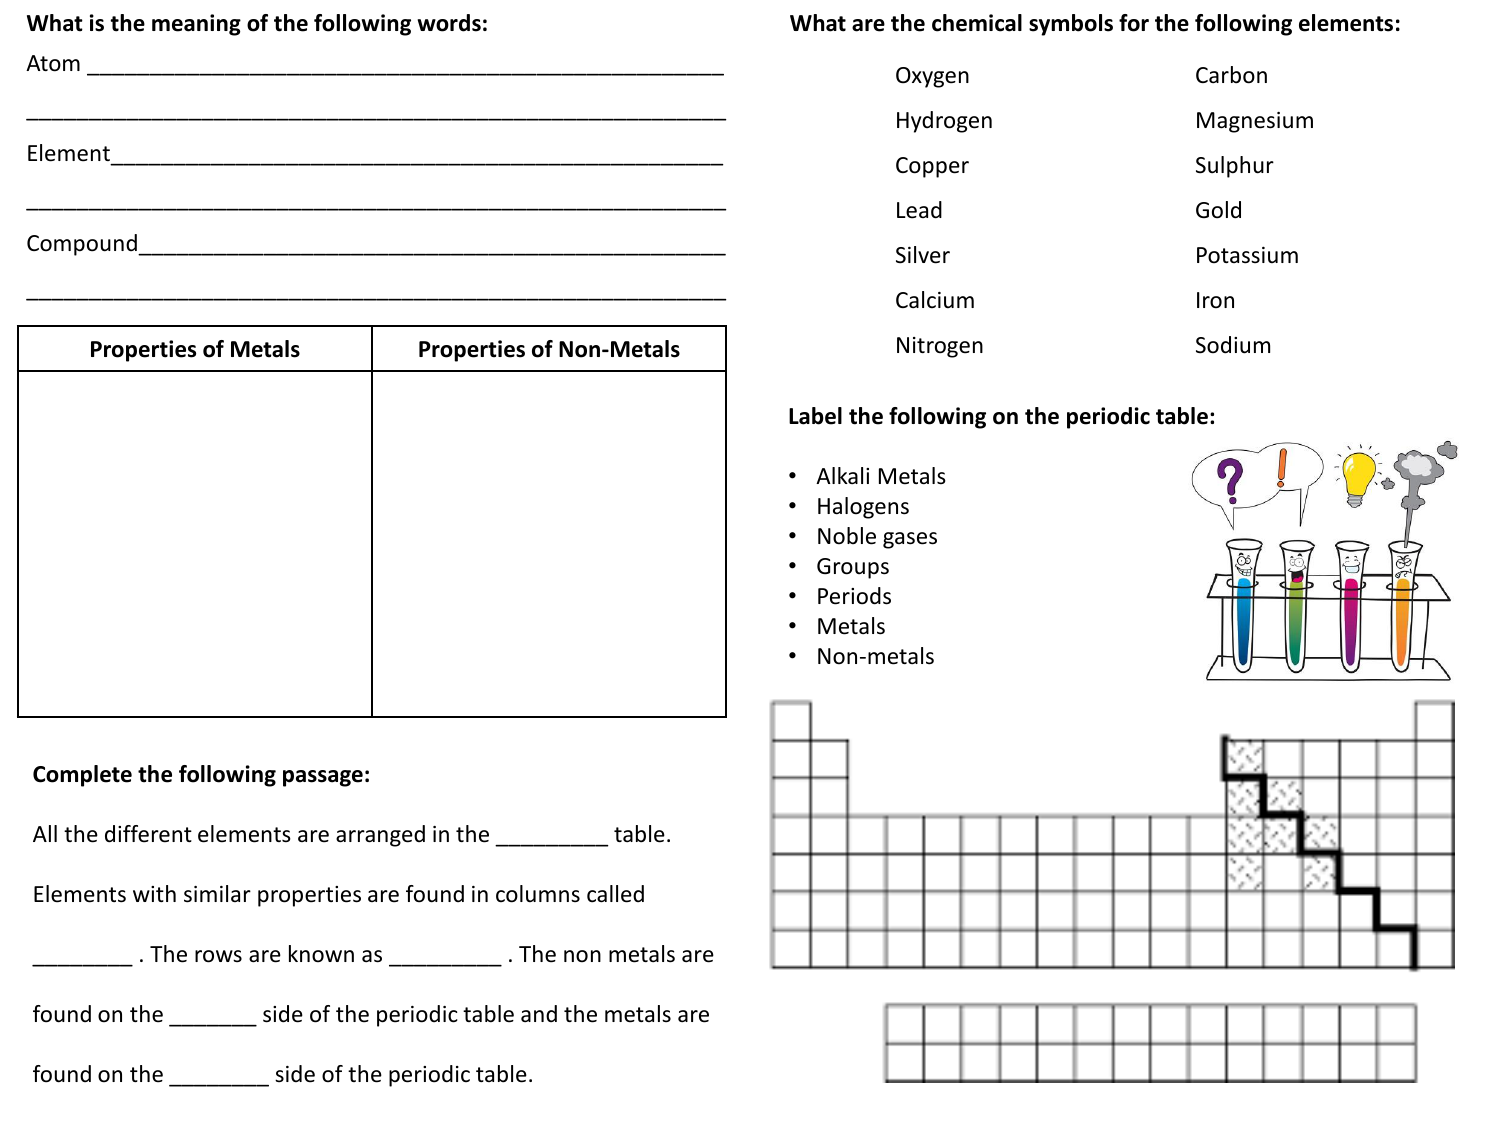 25-Periodic-Table-worksheet Intended For Periodic Table Of Elements Worksheet